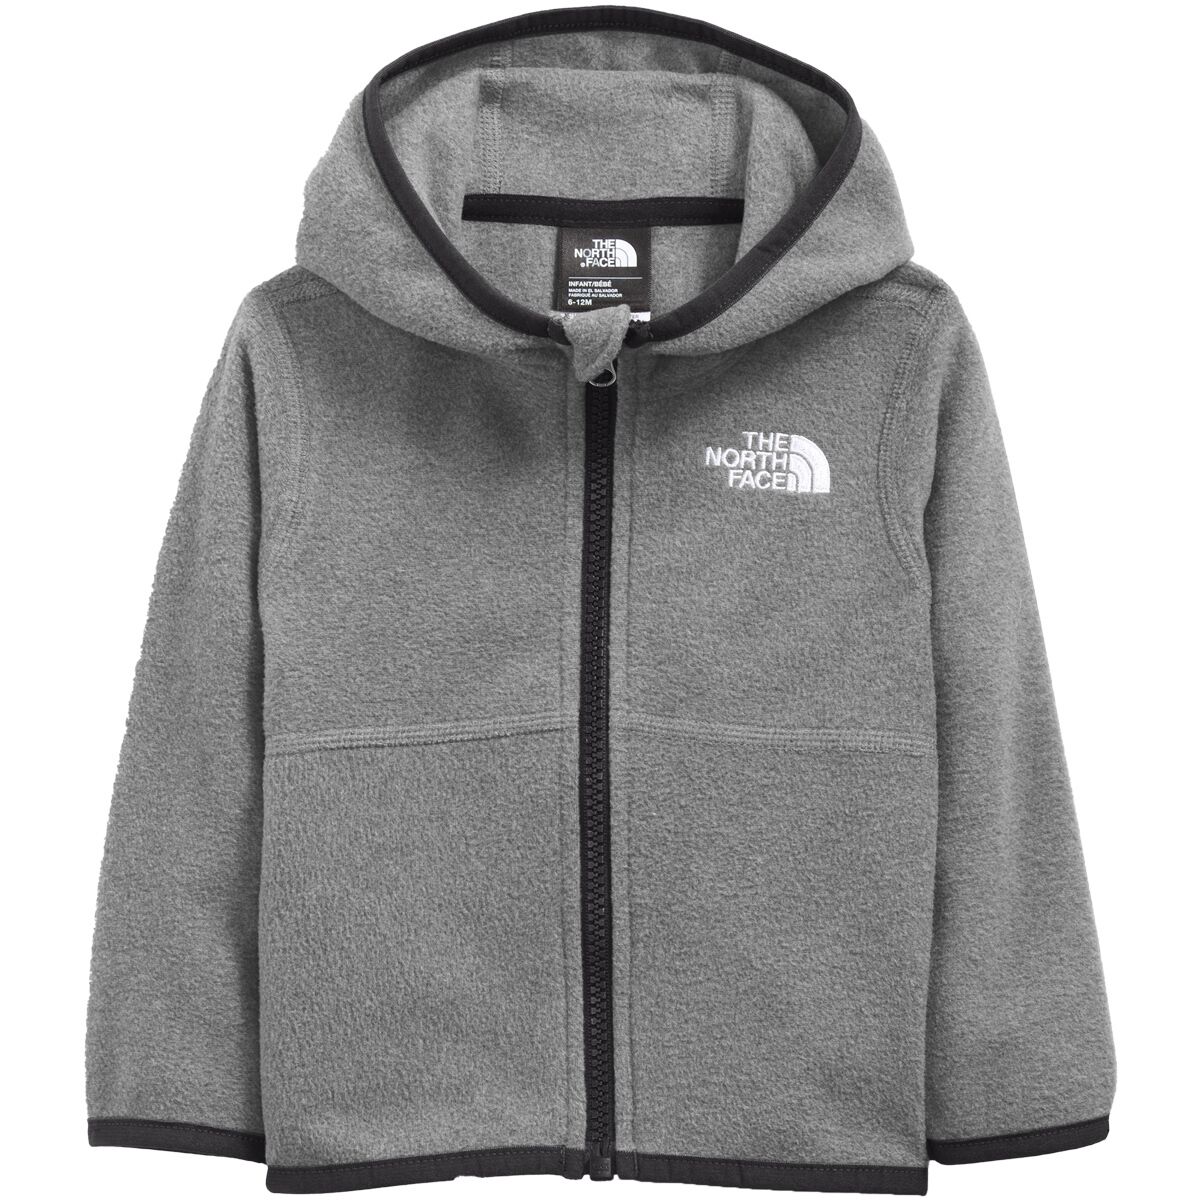 The North Face Glacier Full-Zip Hooded Jacket - Infant Boys ...